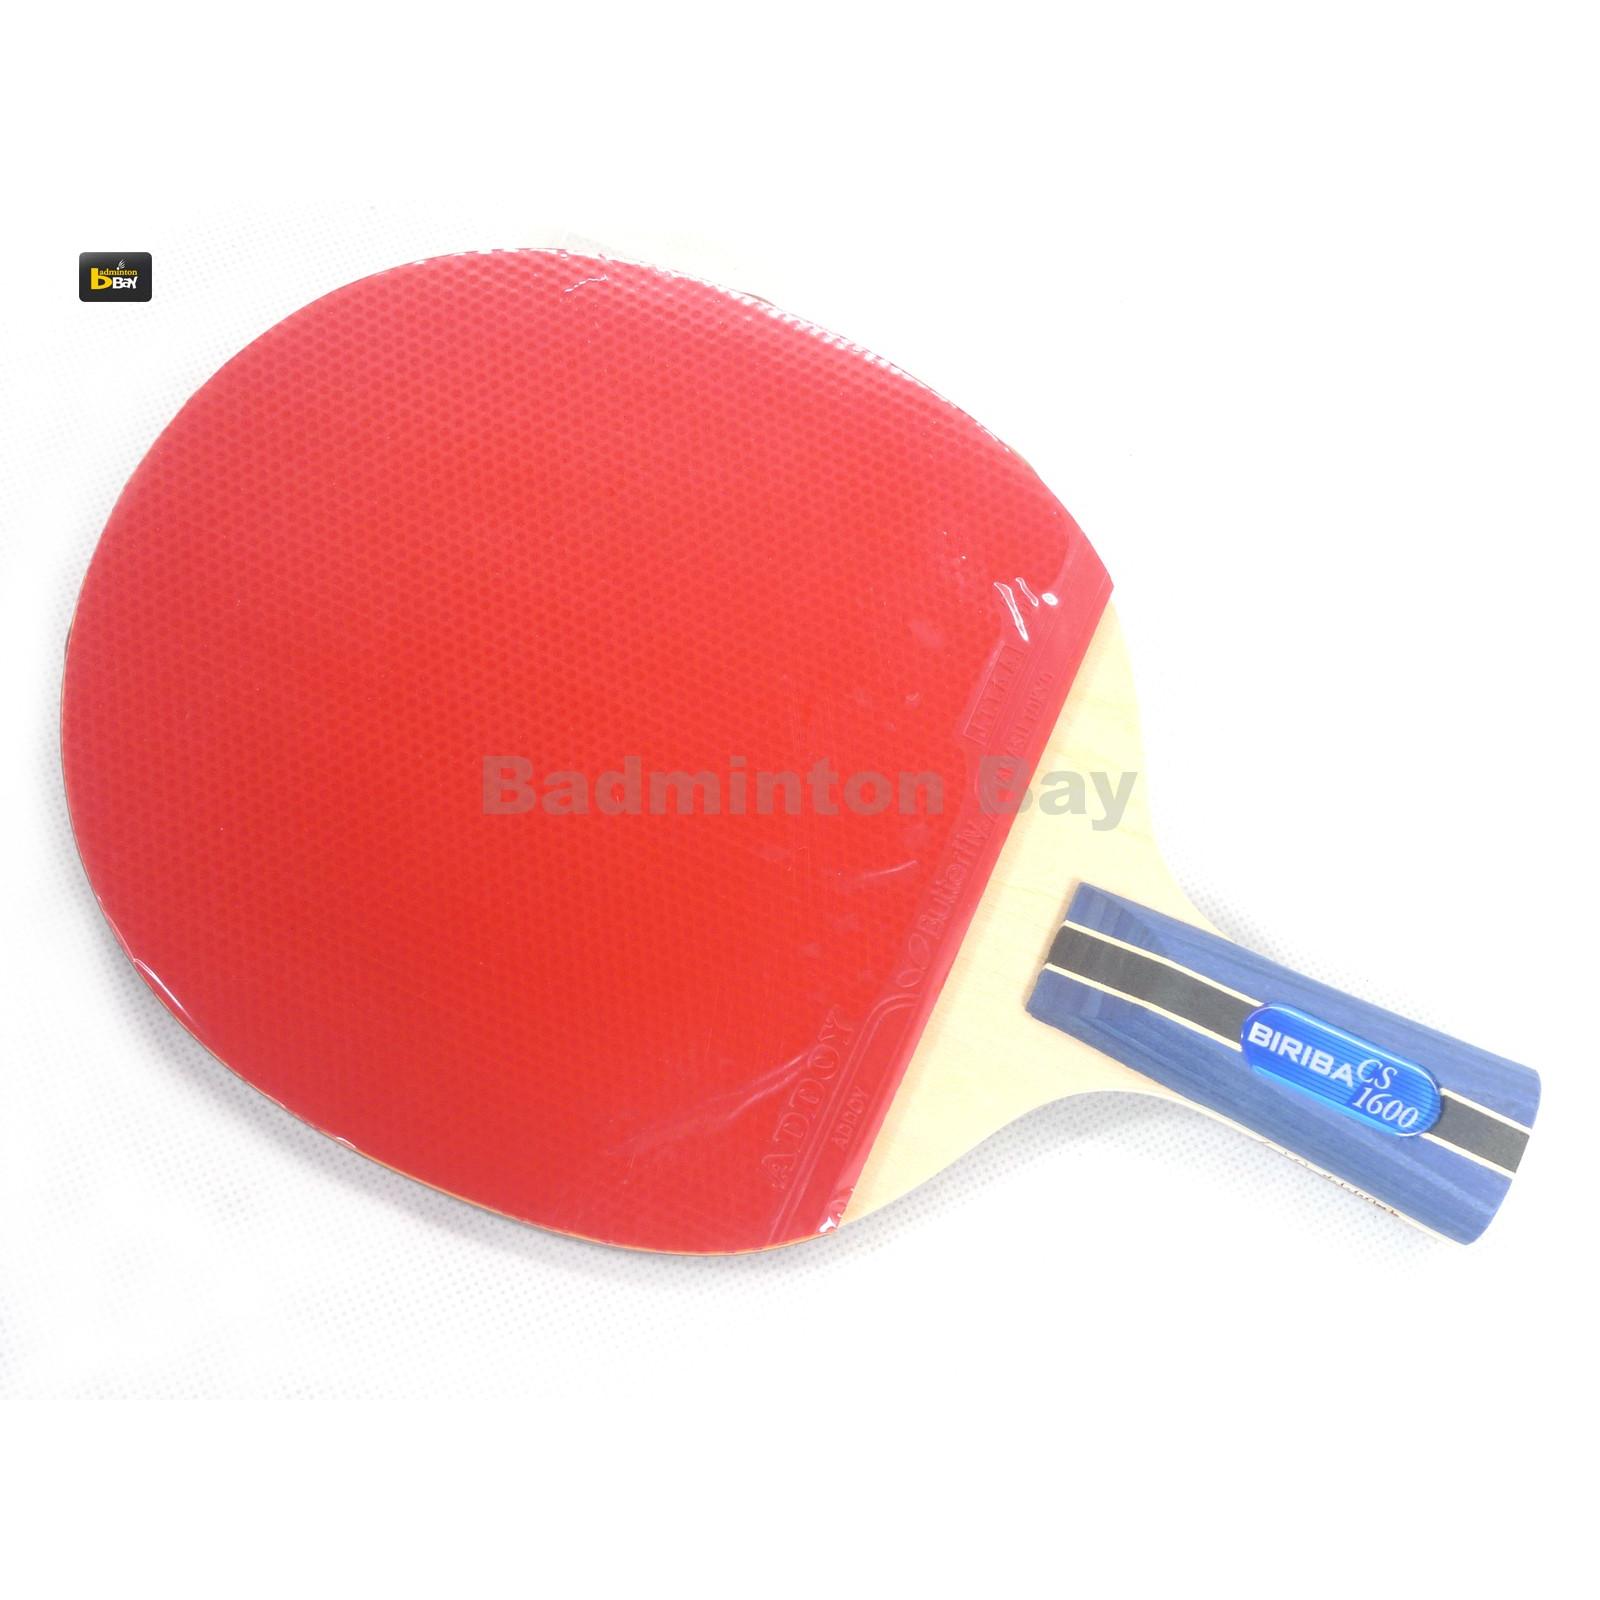 Free Ship Neottec 500 Table Tennis & Ping Pong Racket High Quality Authentic 